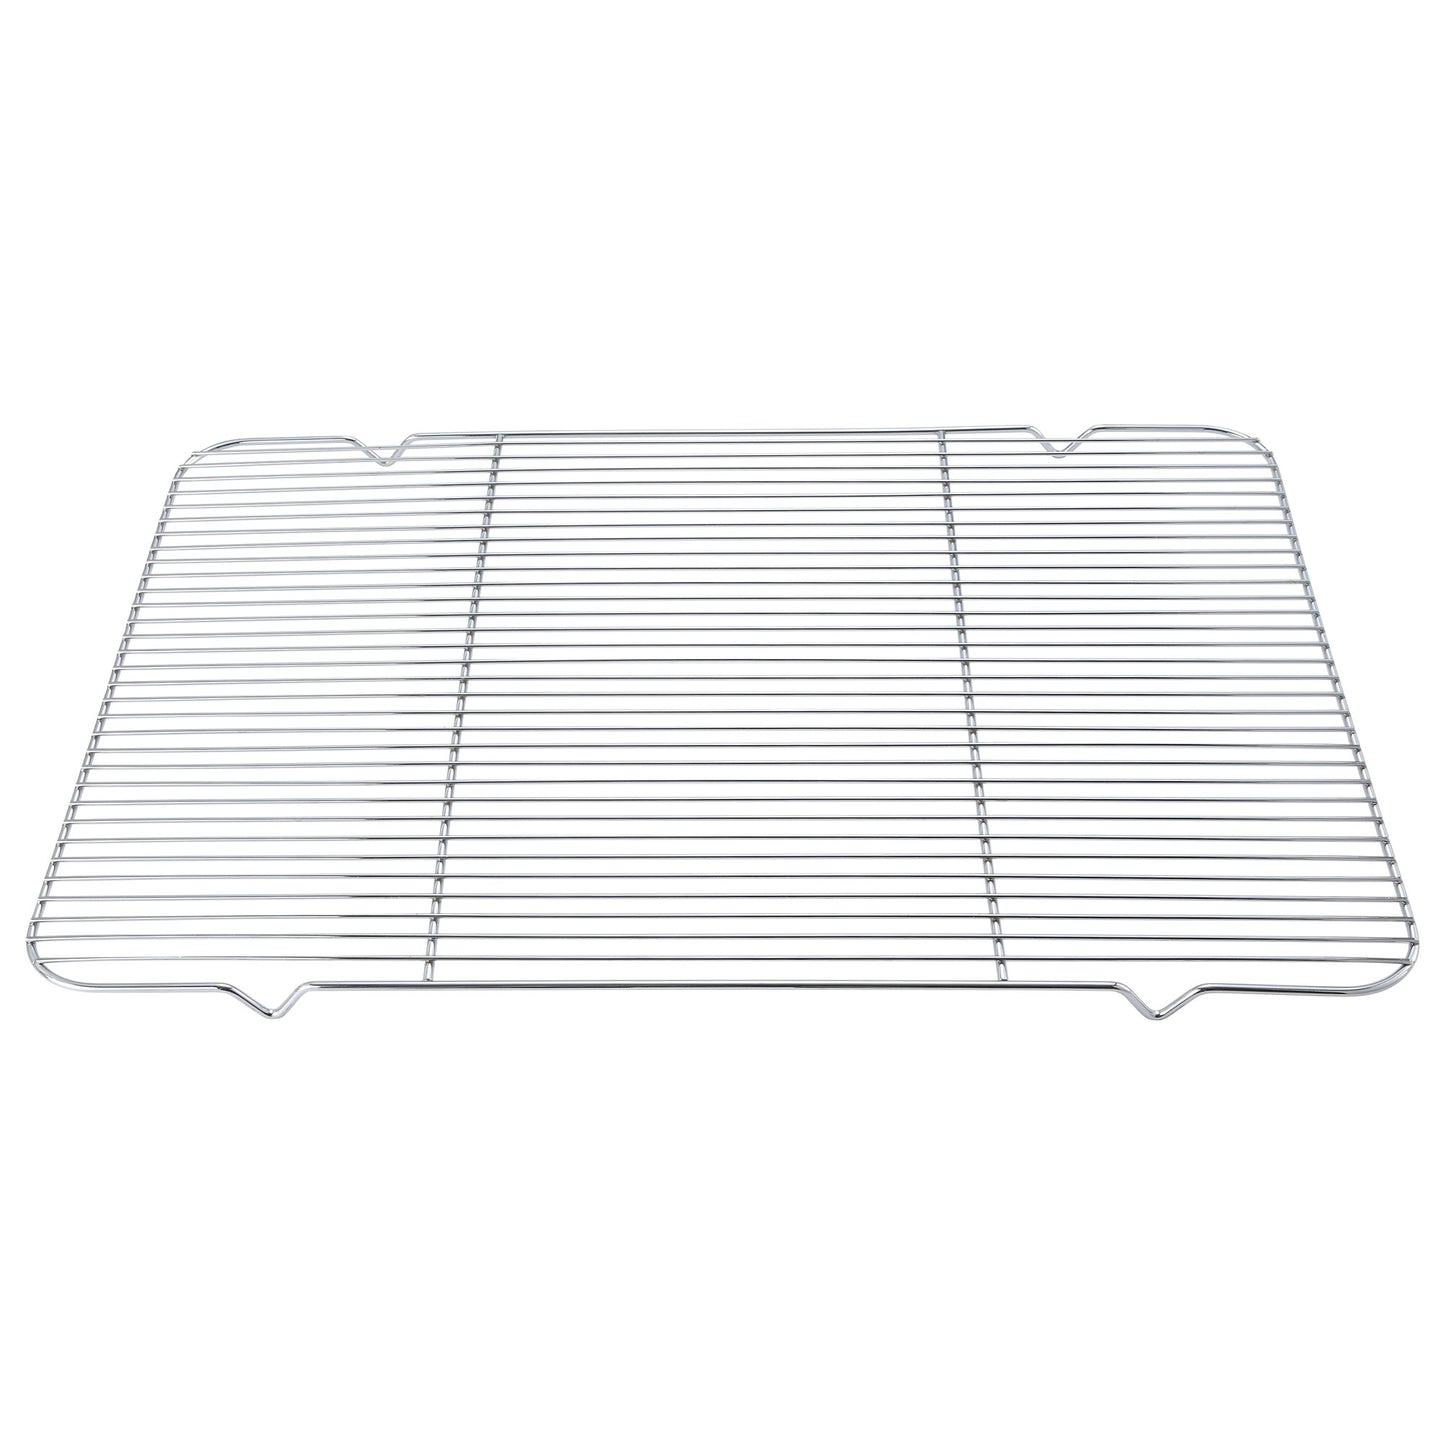 ICR-1725 - Icing/Cooling Rack, 16-1/4" x 25"